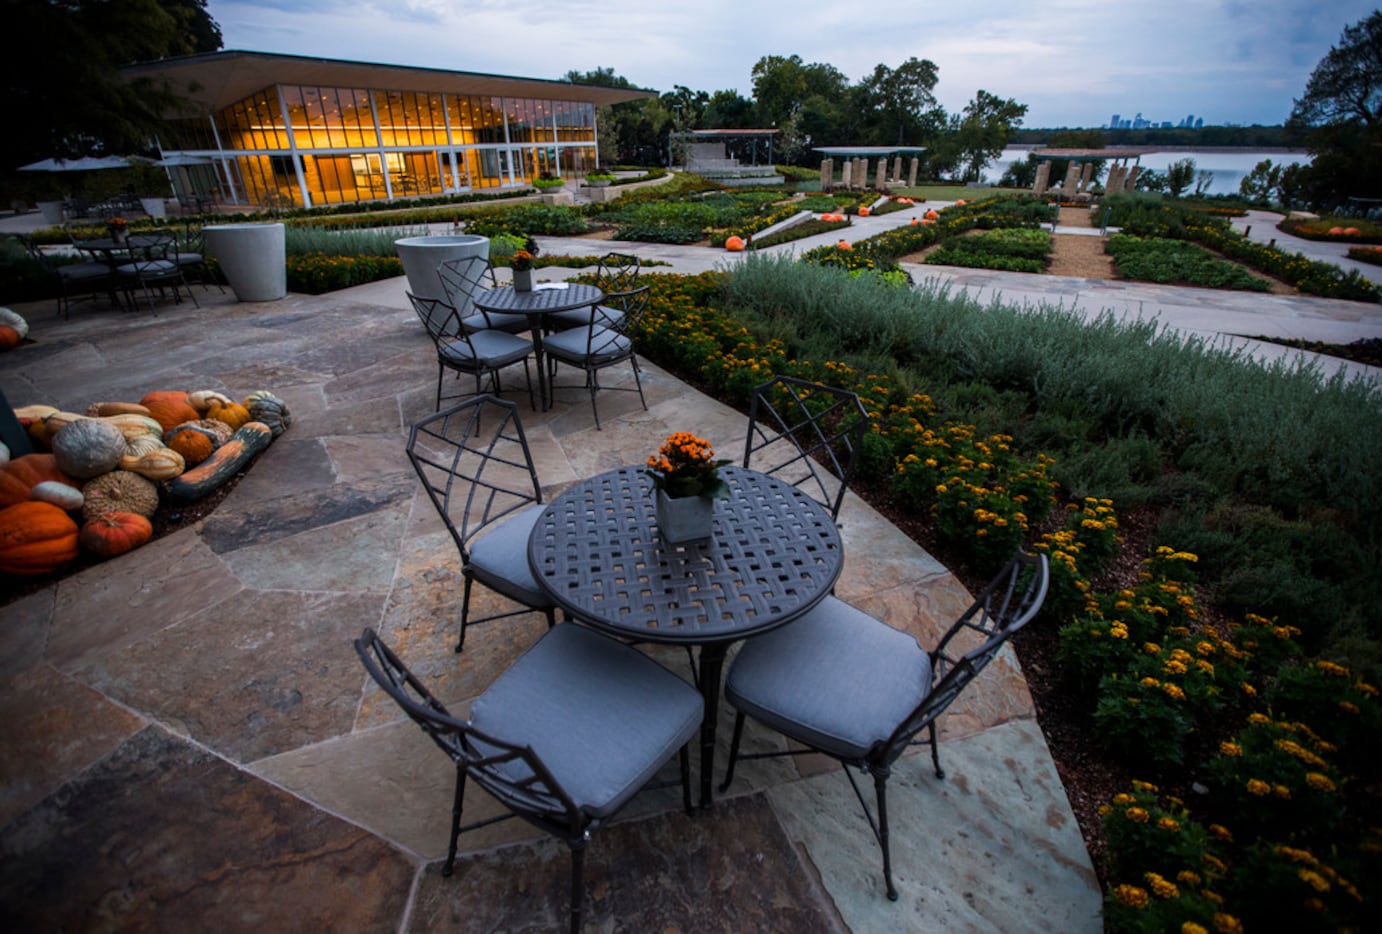 A seating area near the test kitchen building at the new Tasteful Place edible garden at the...